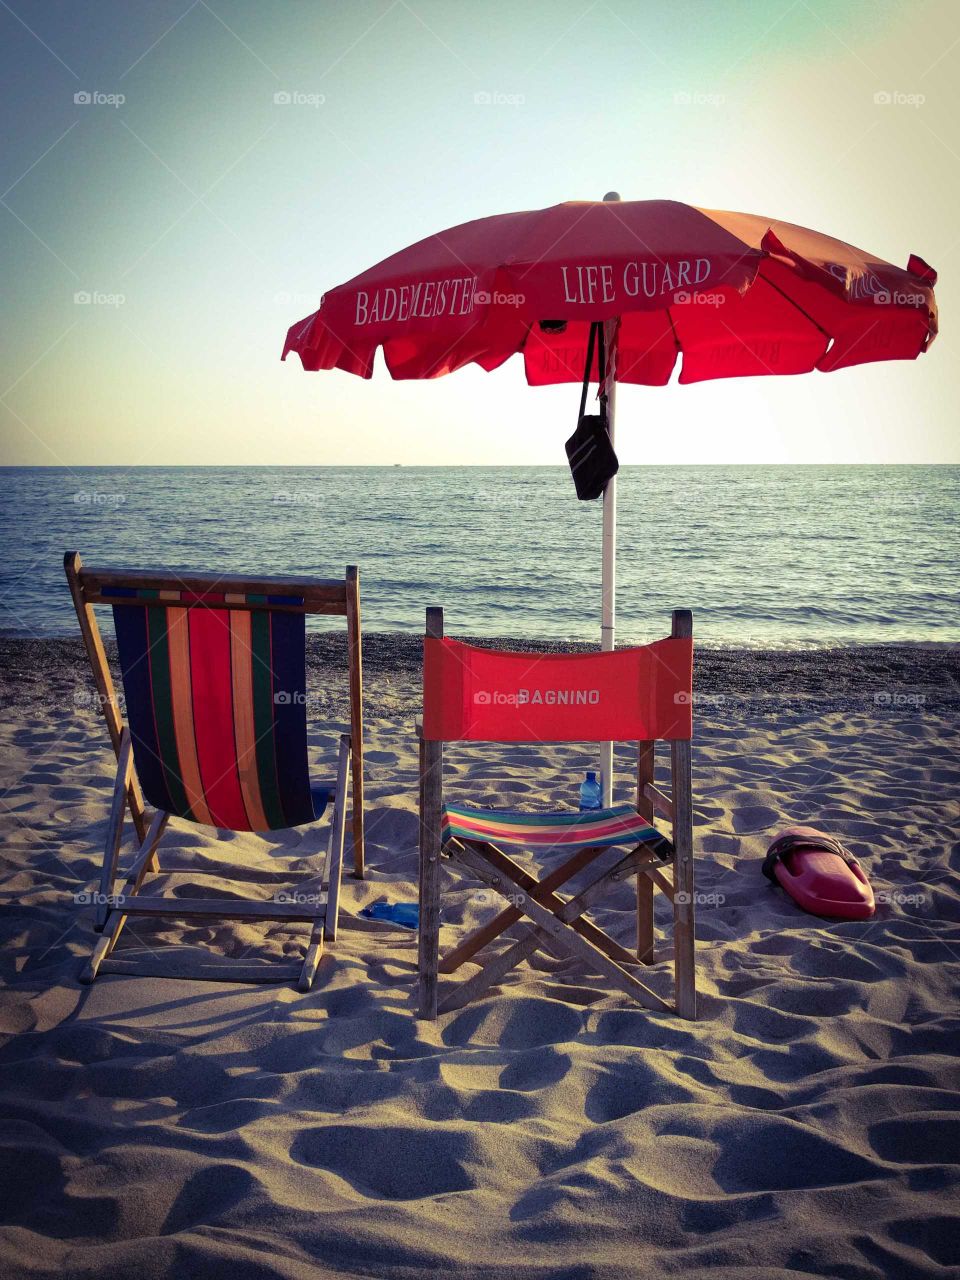 Umbrella and red chair Lifeguard station